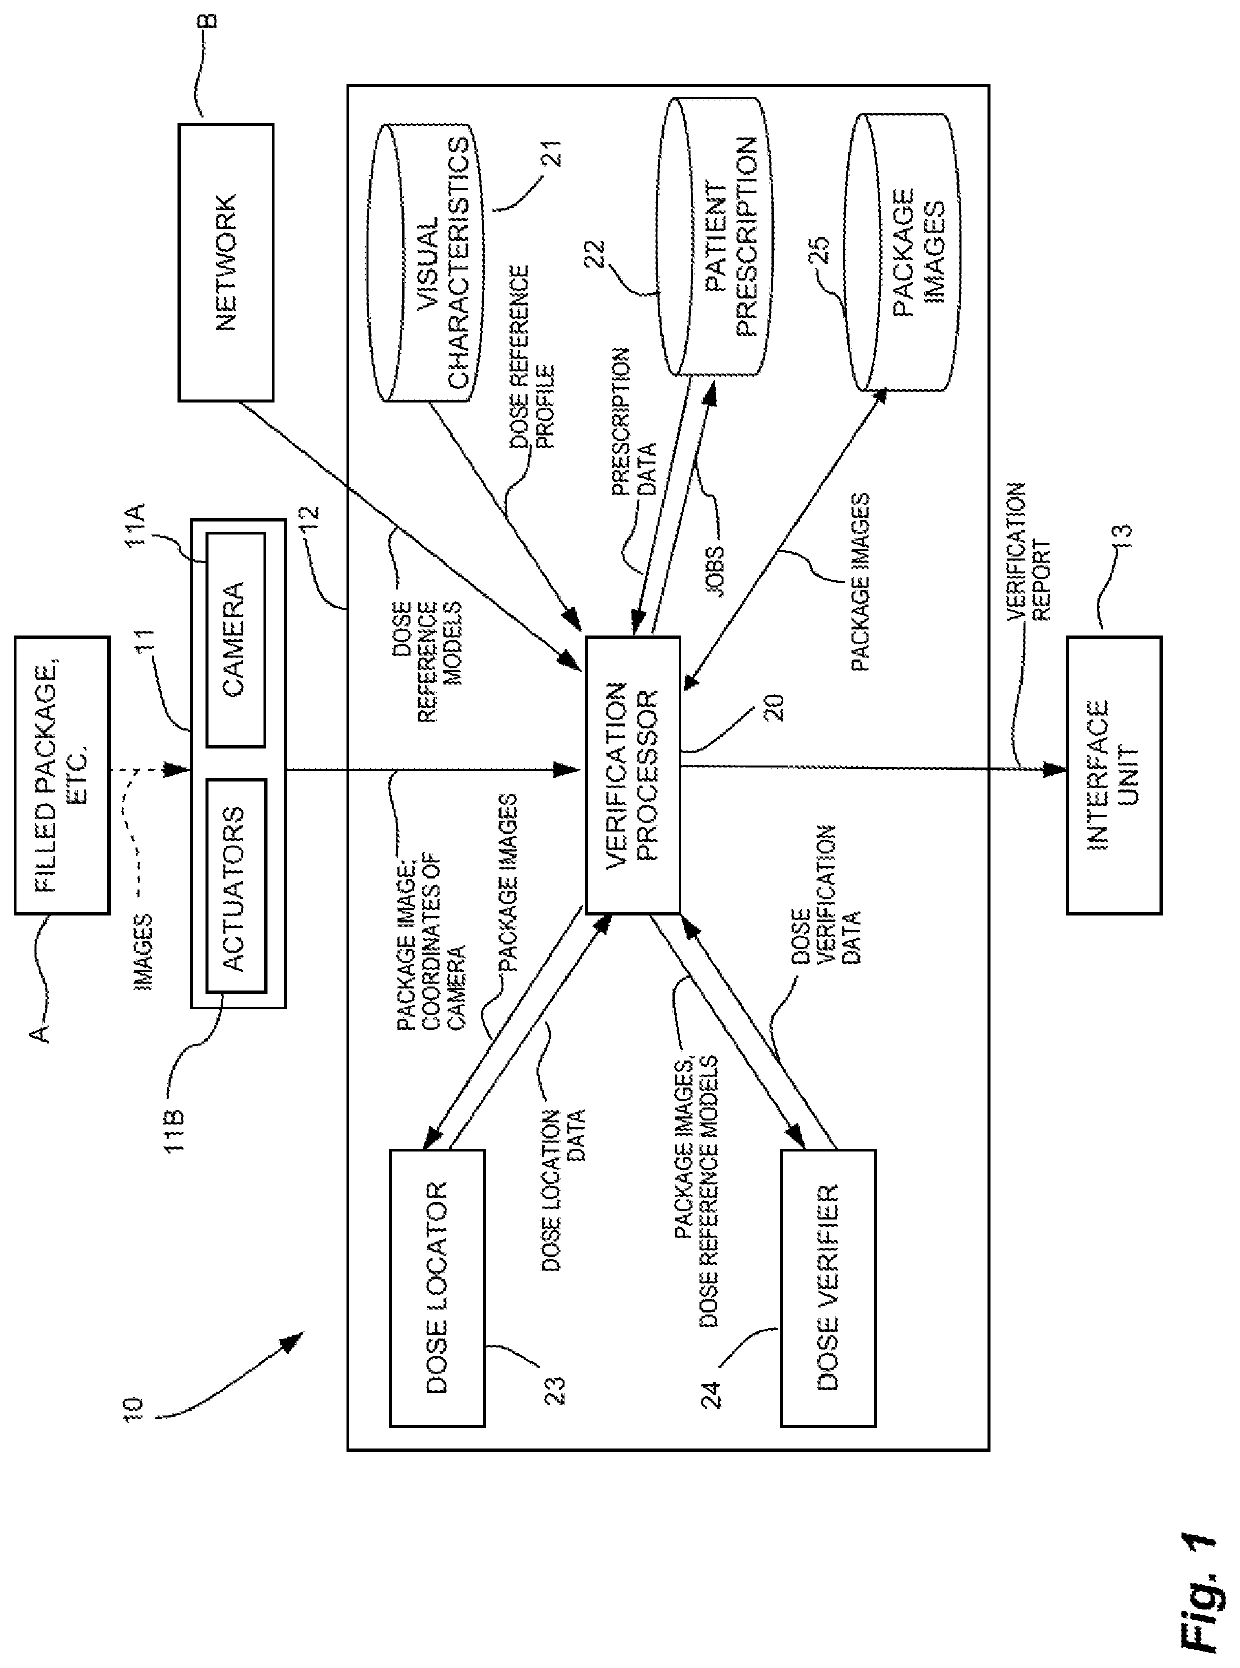 Verification system for prescription packaging and method